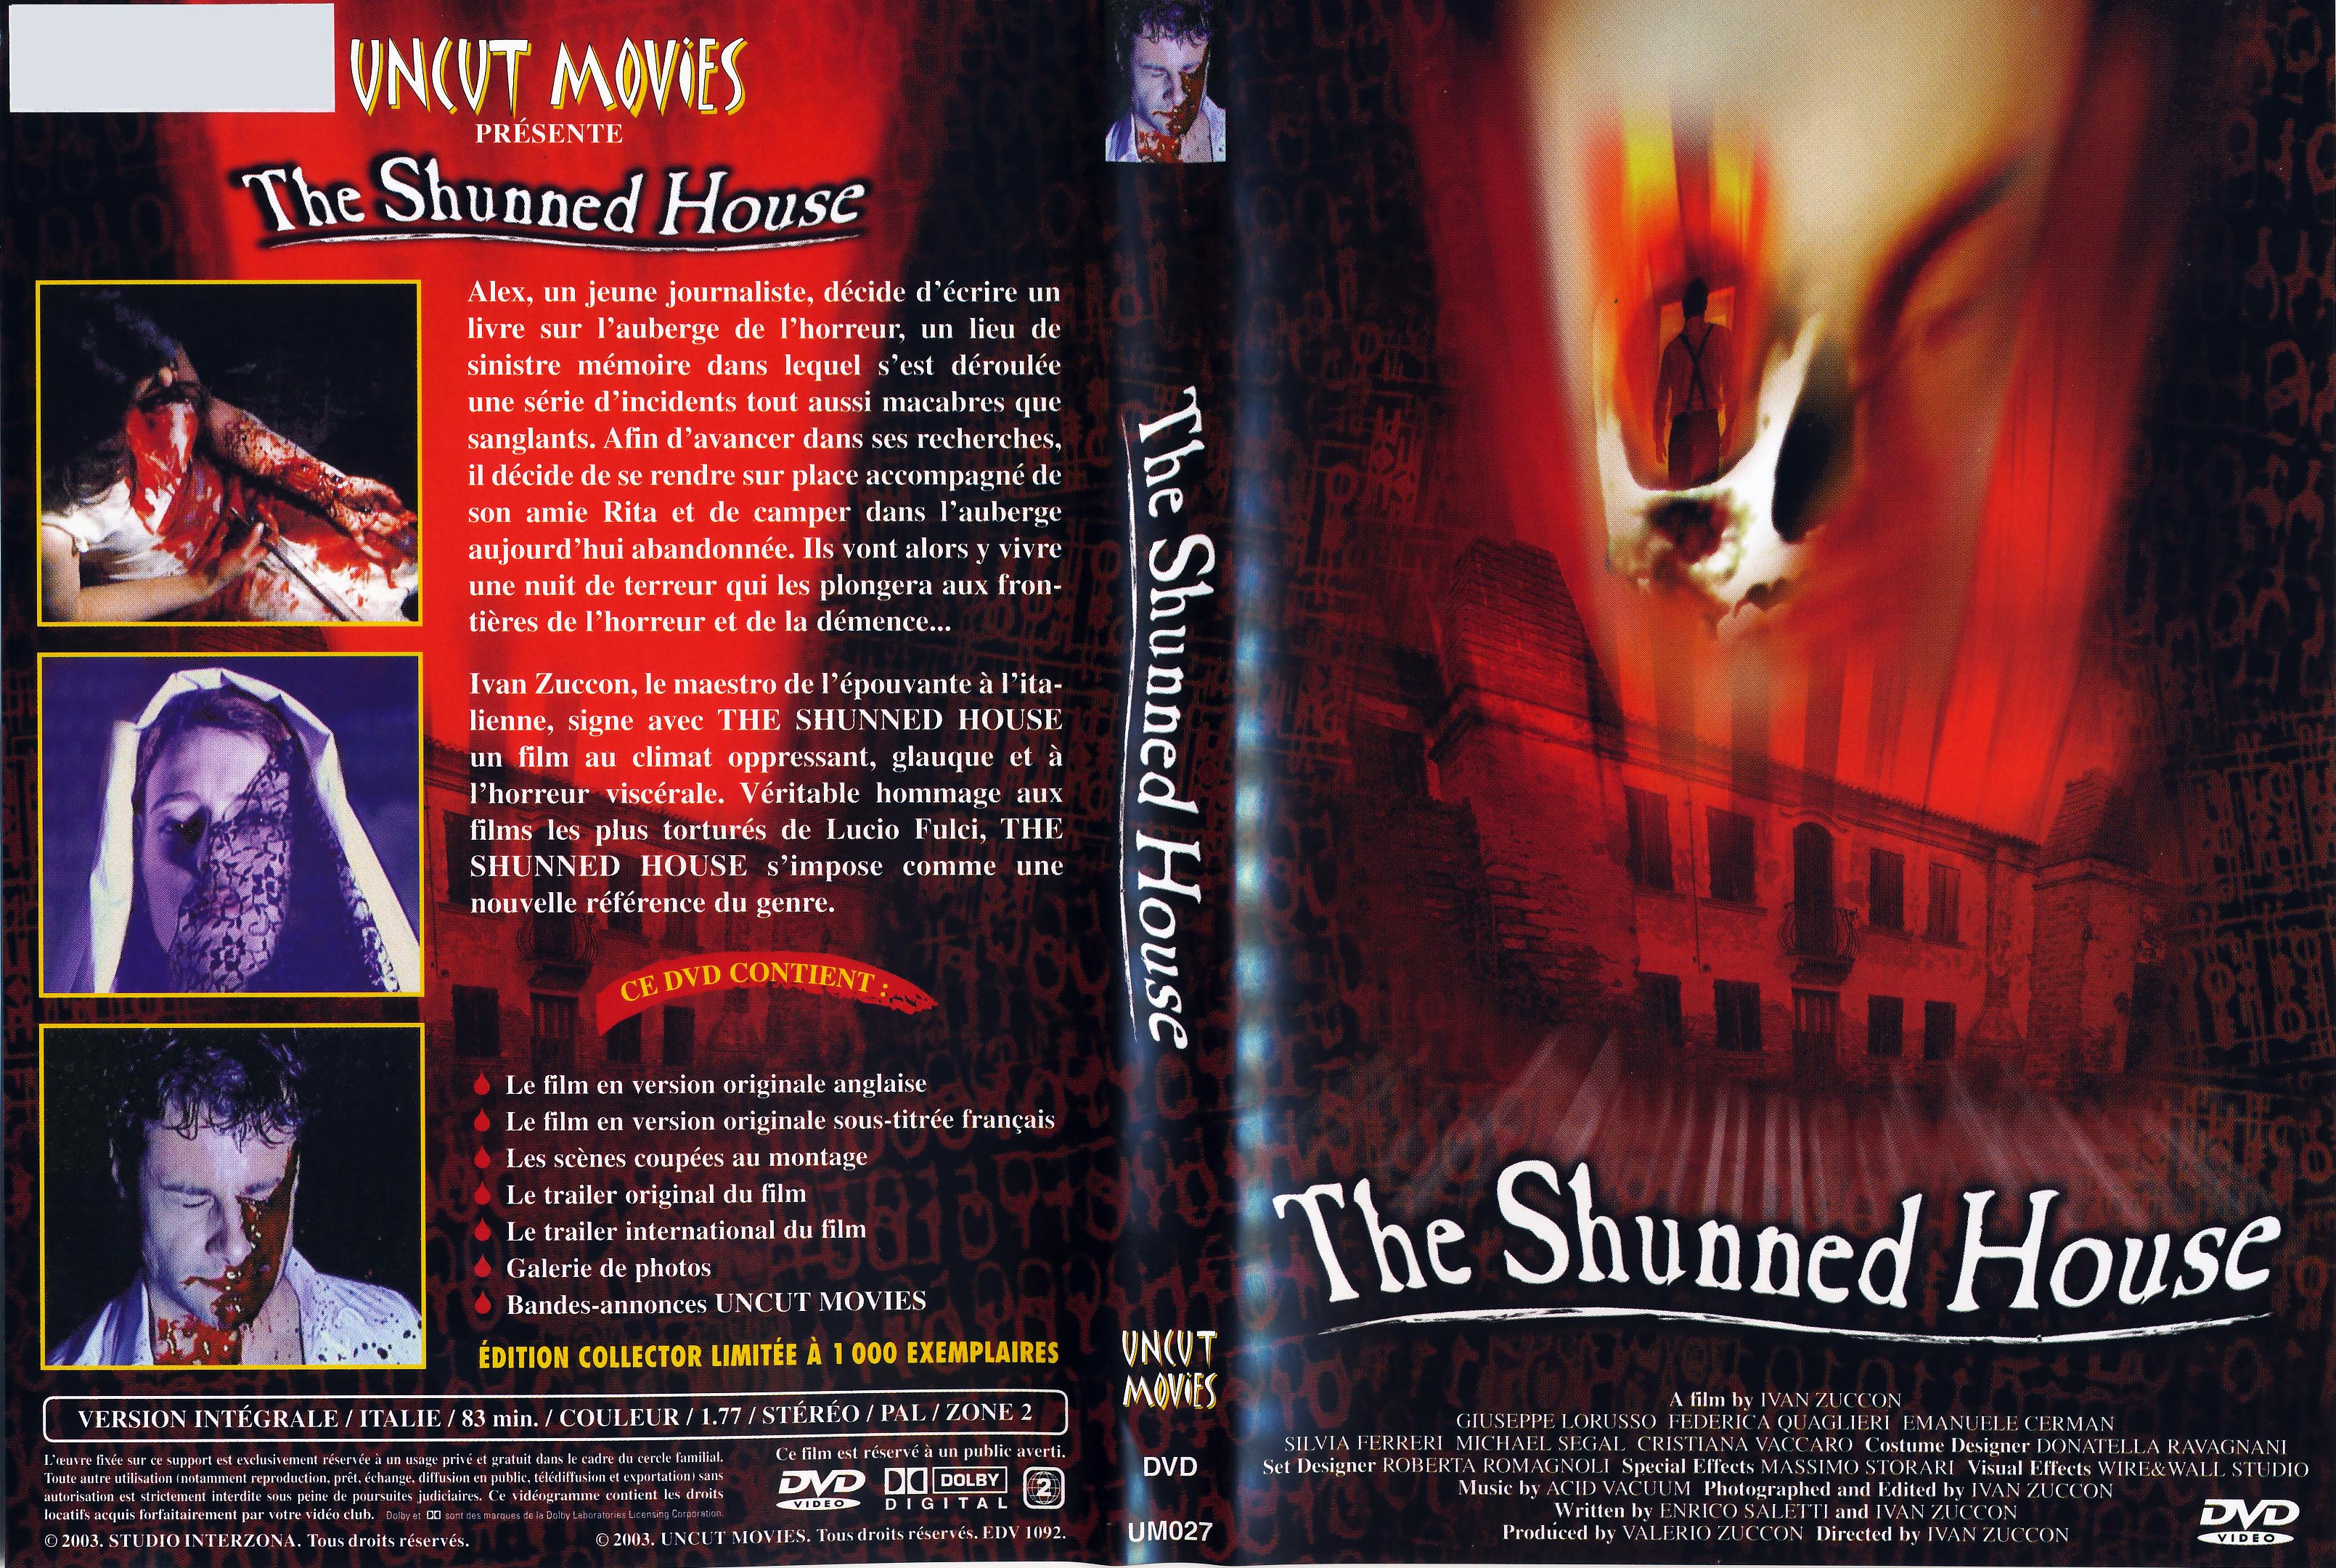 Jaquette DVD The shunned house